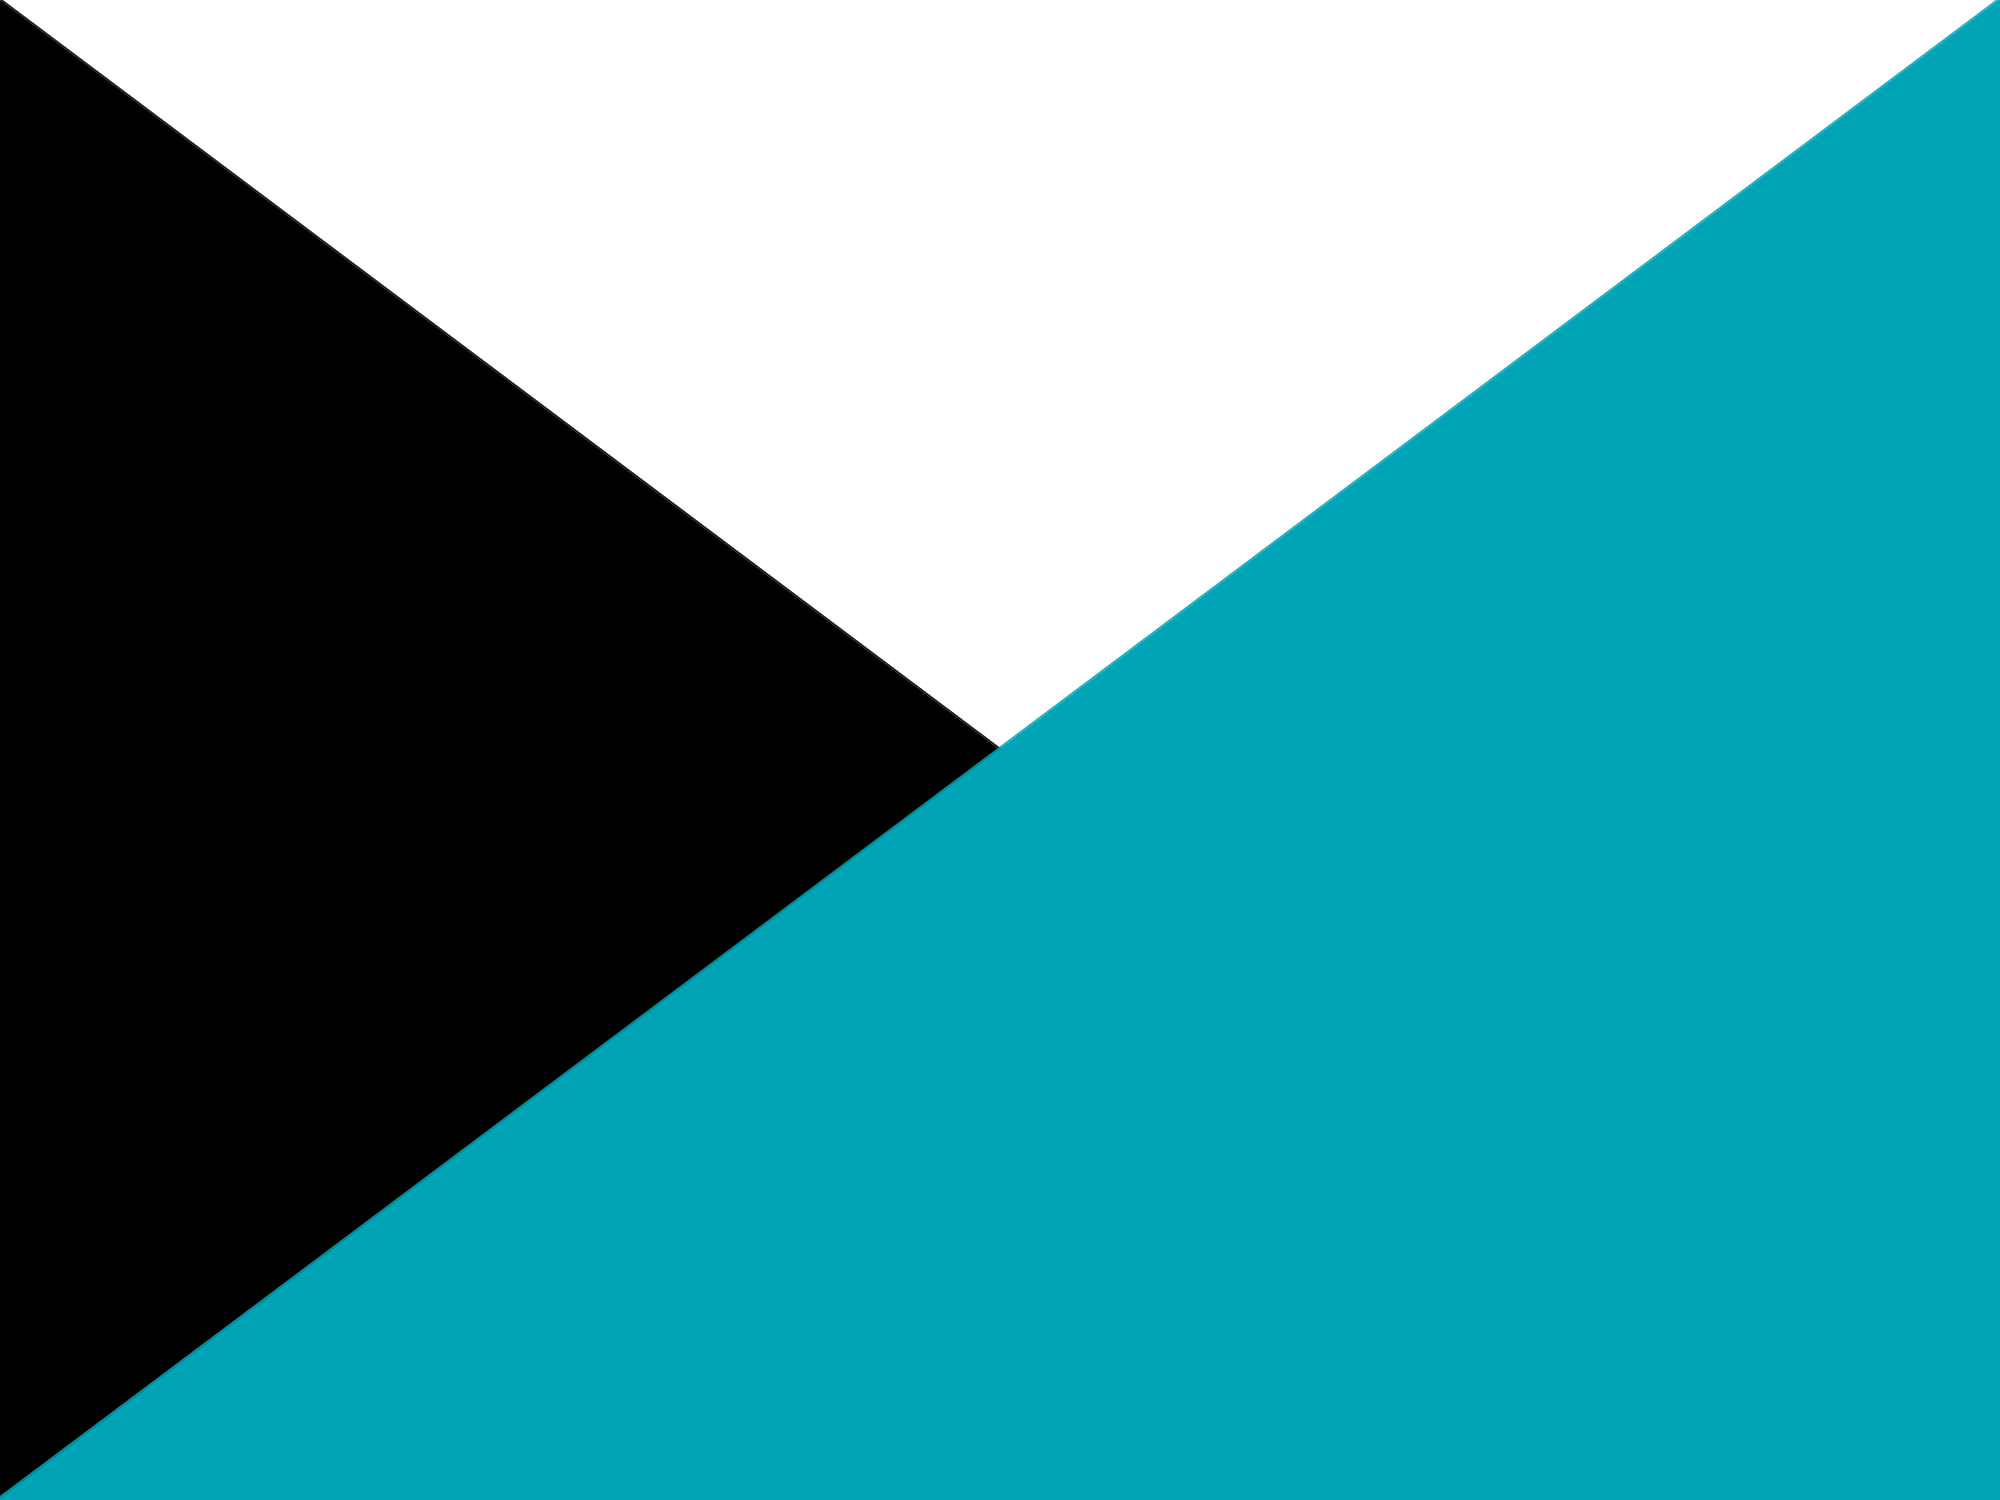 three triangles in white, teal, and black